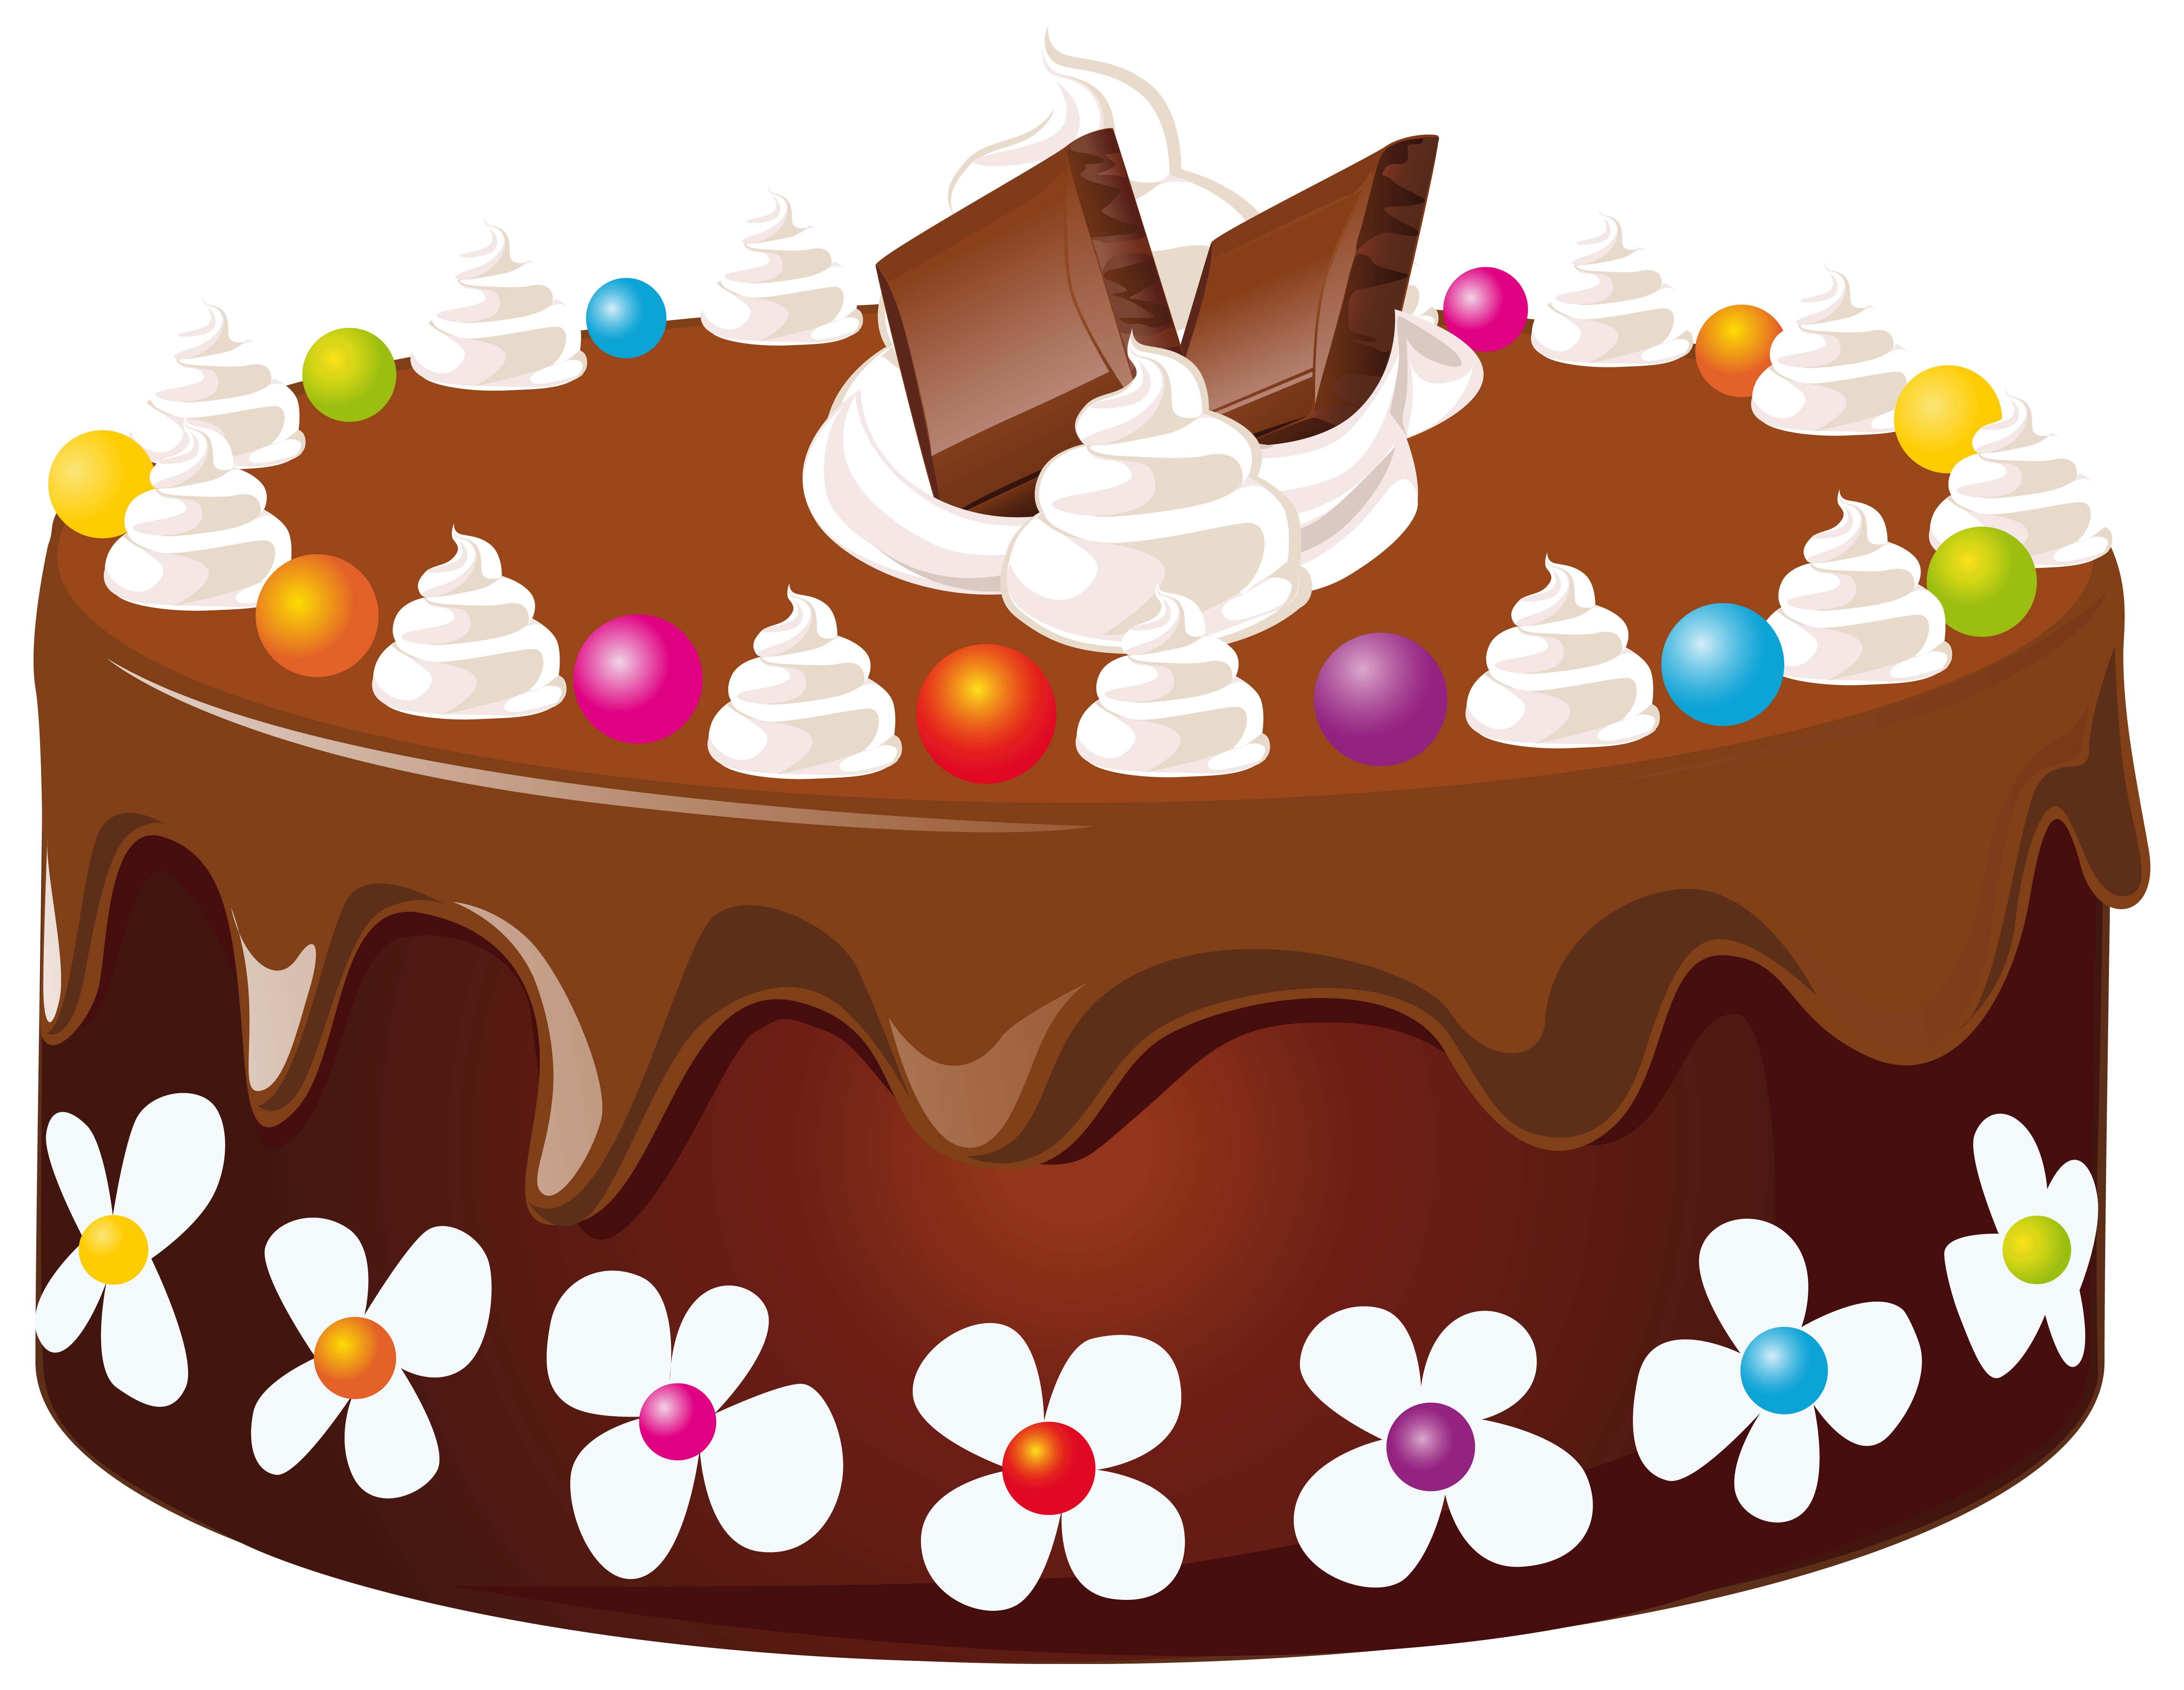 Birthday cake chocolate icing. Desserts clipart baked goods